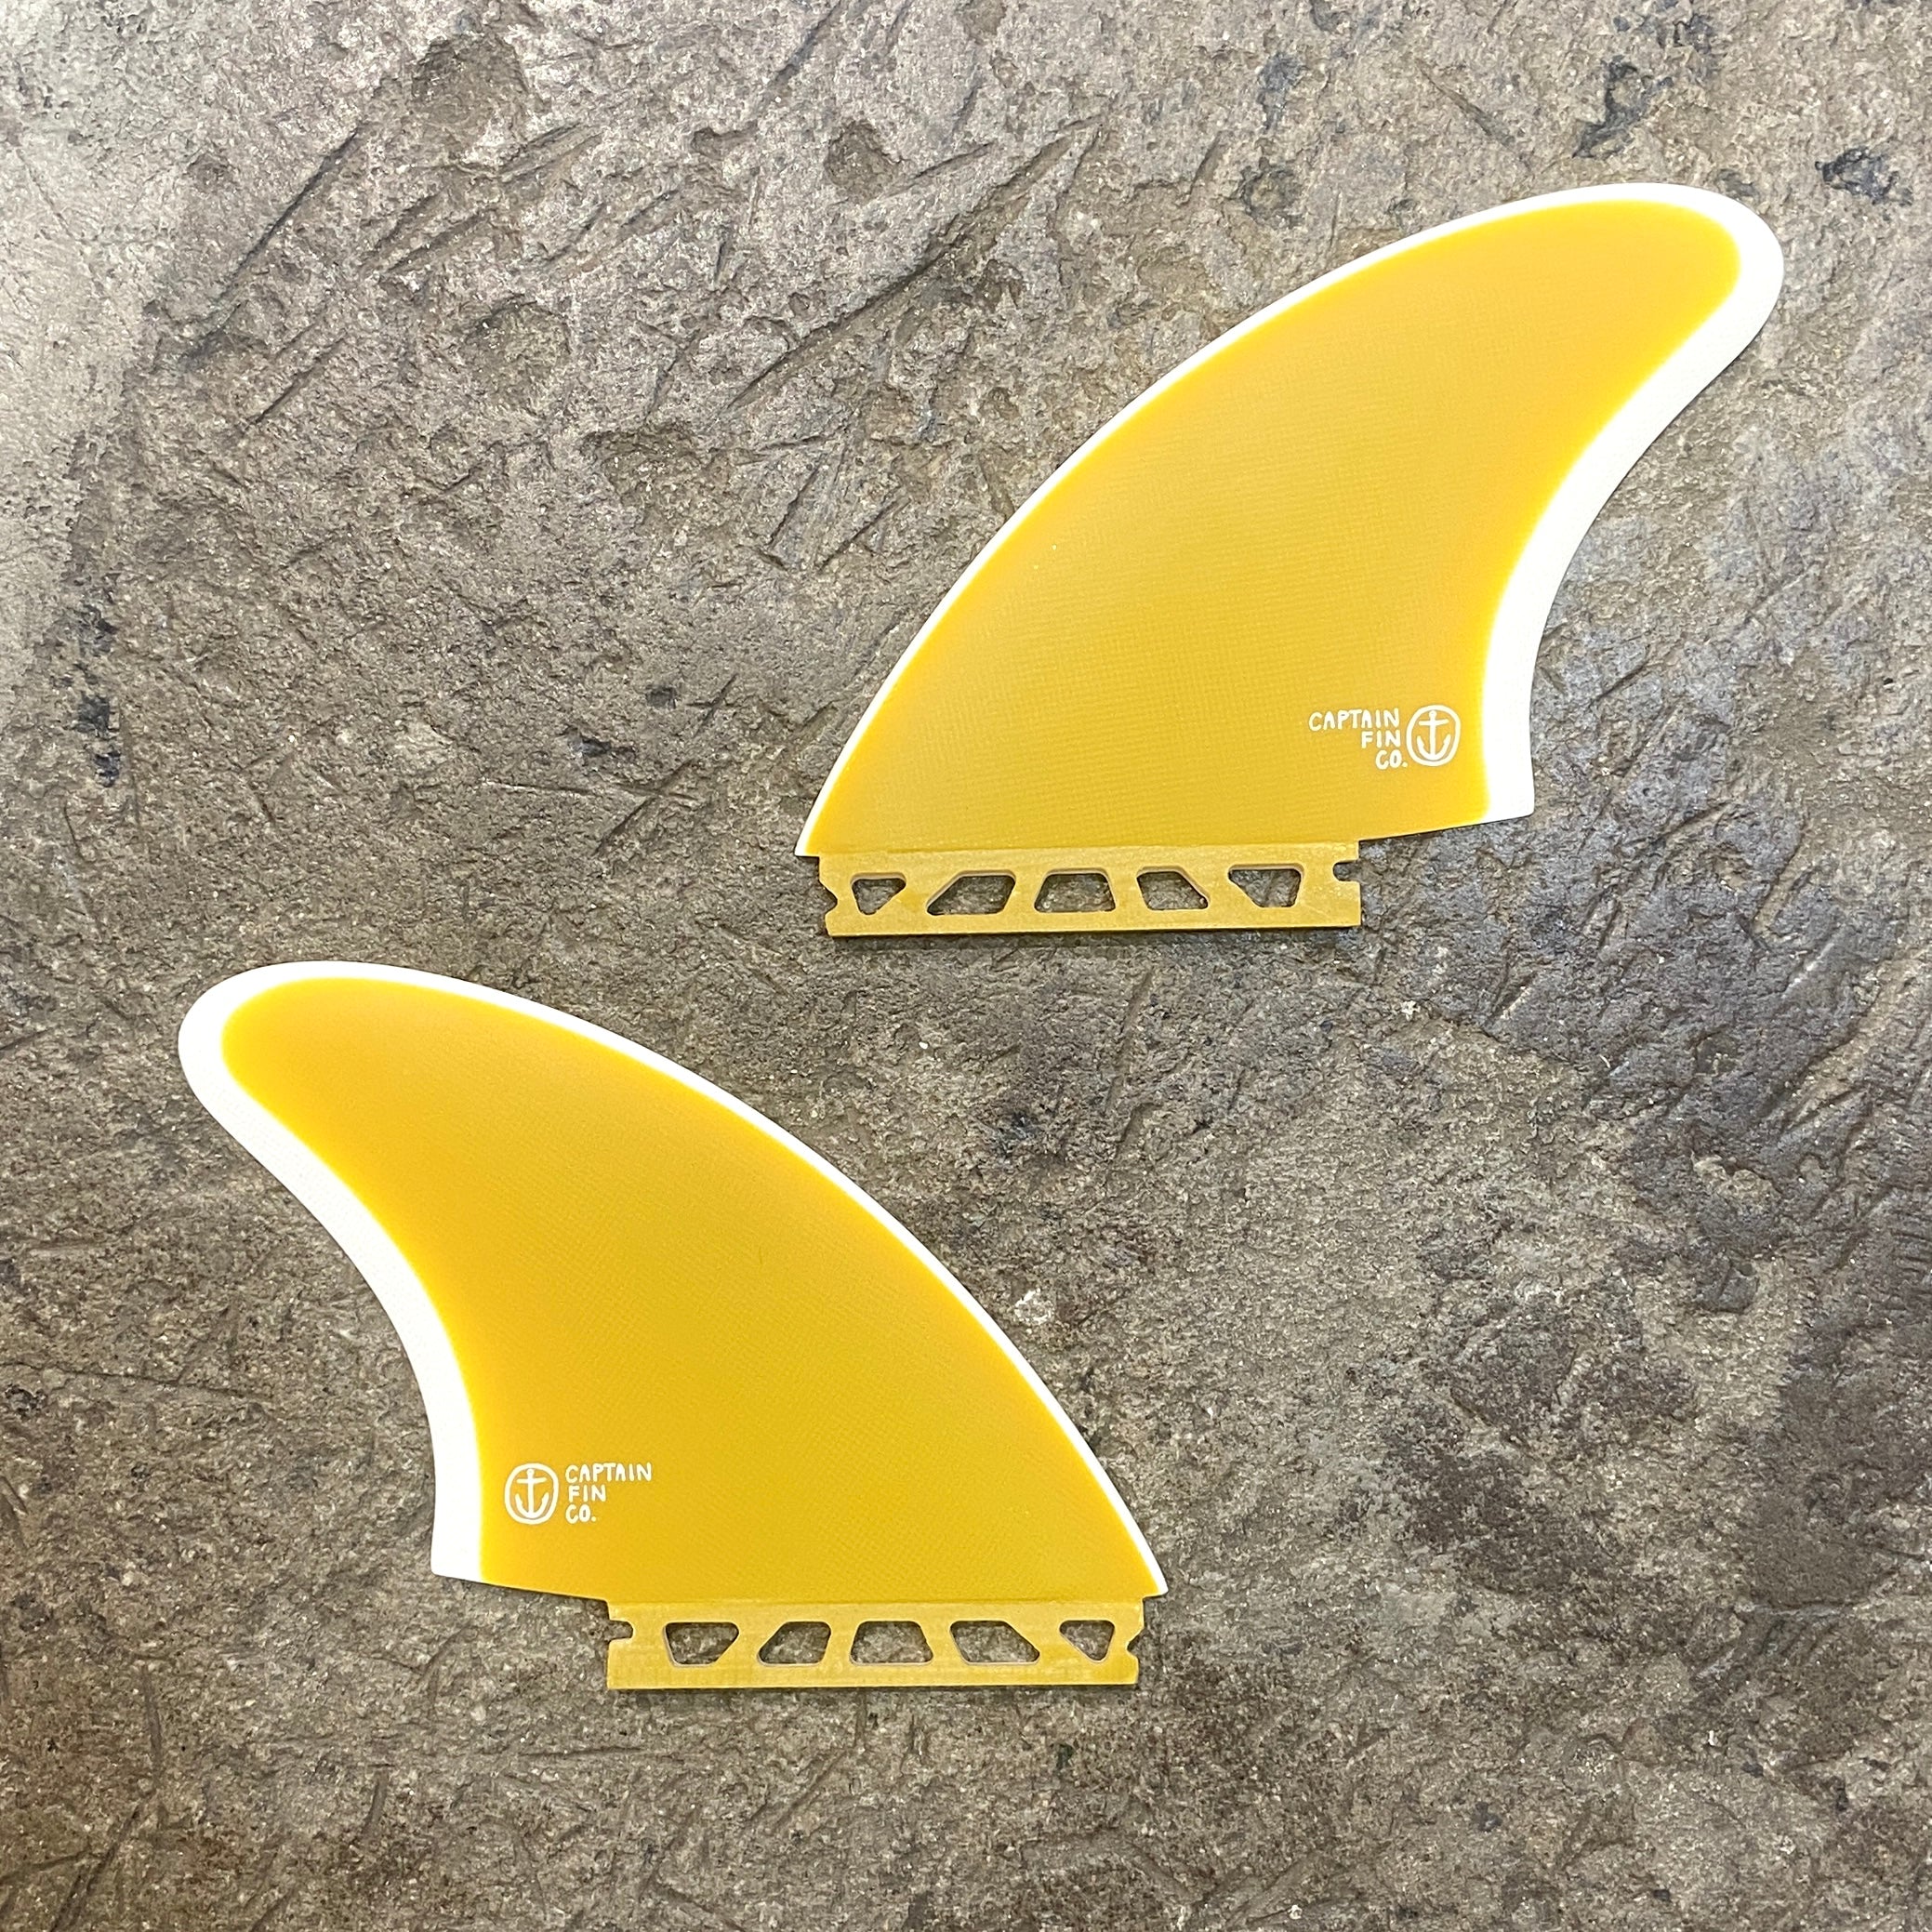 BUY CAPTAIN FIN KEEL AND TWIN FINS AT KISS SURF STORE IN Cape Town